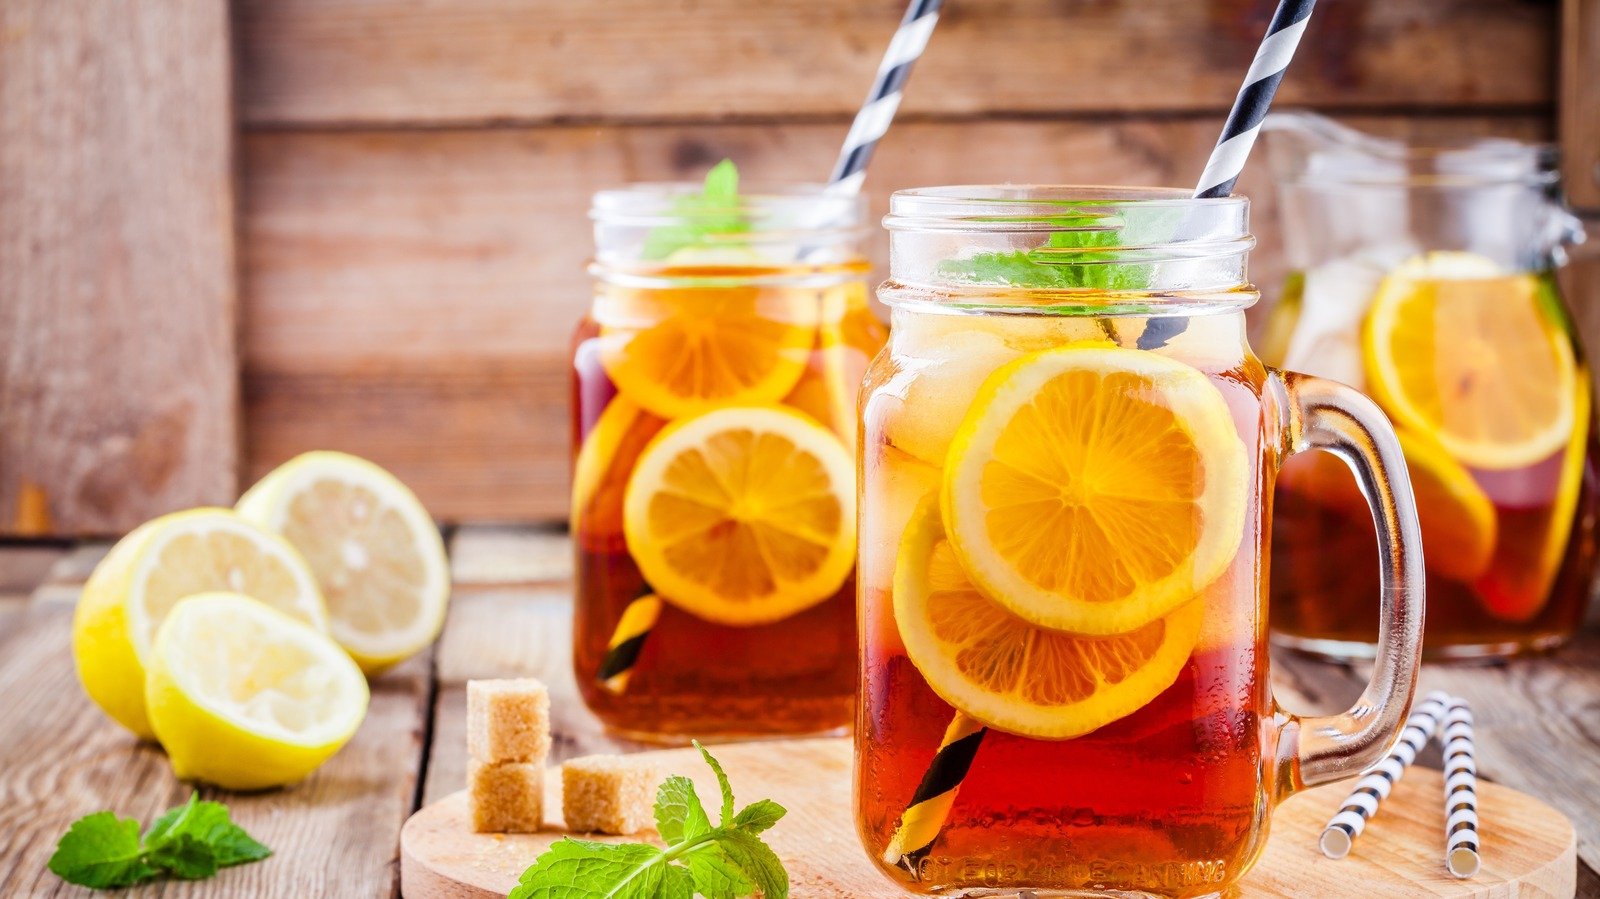 33 Popular Iced Tea Brands, Ranked Worst To Best - Mashed